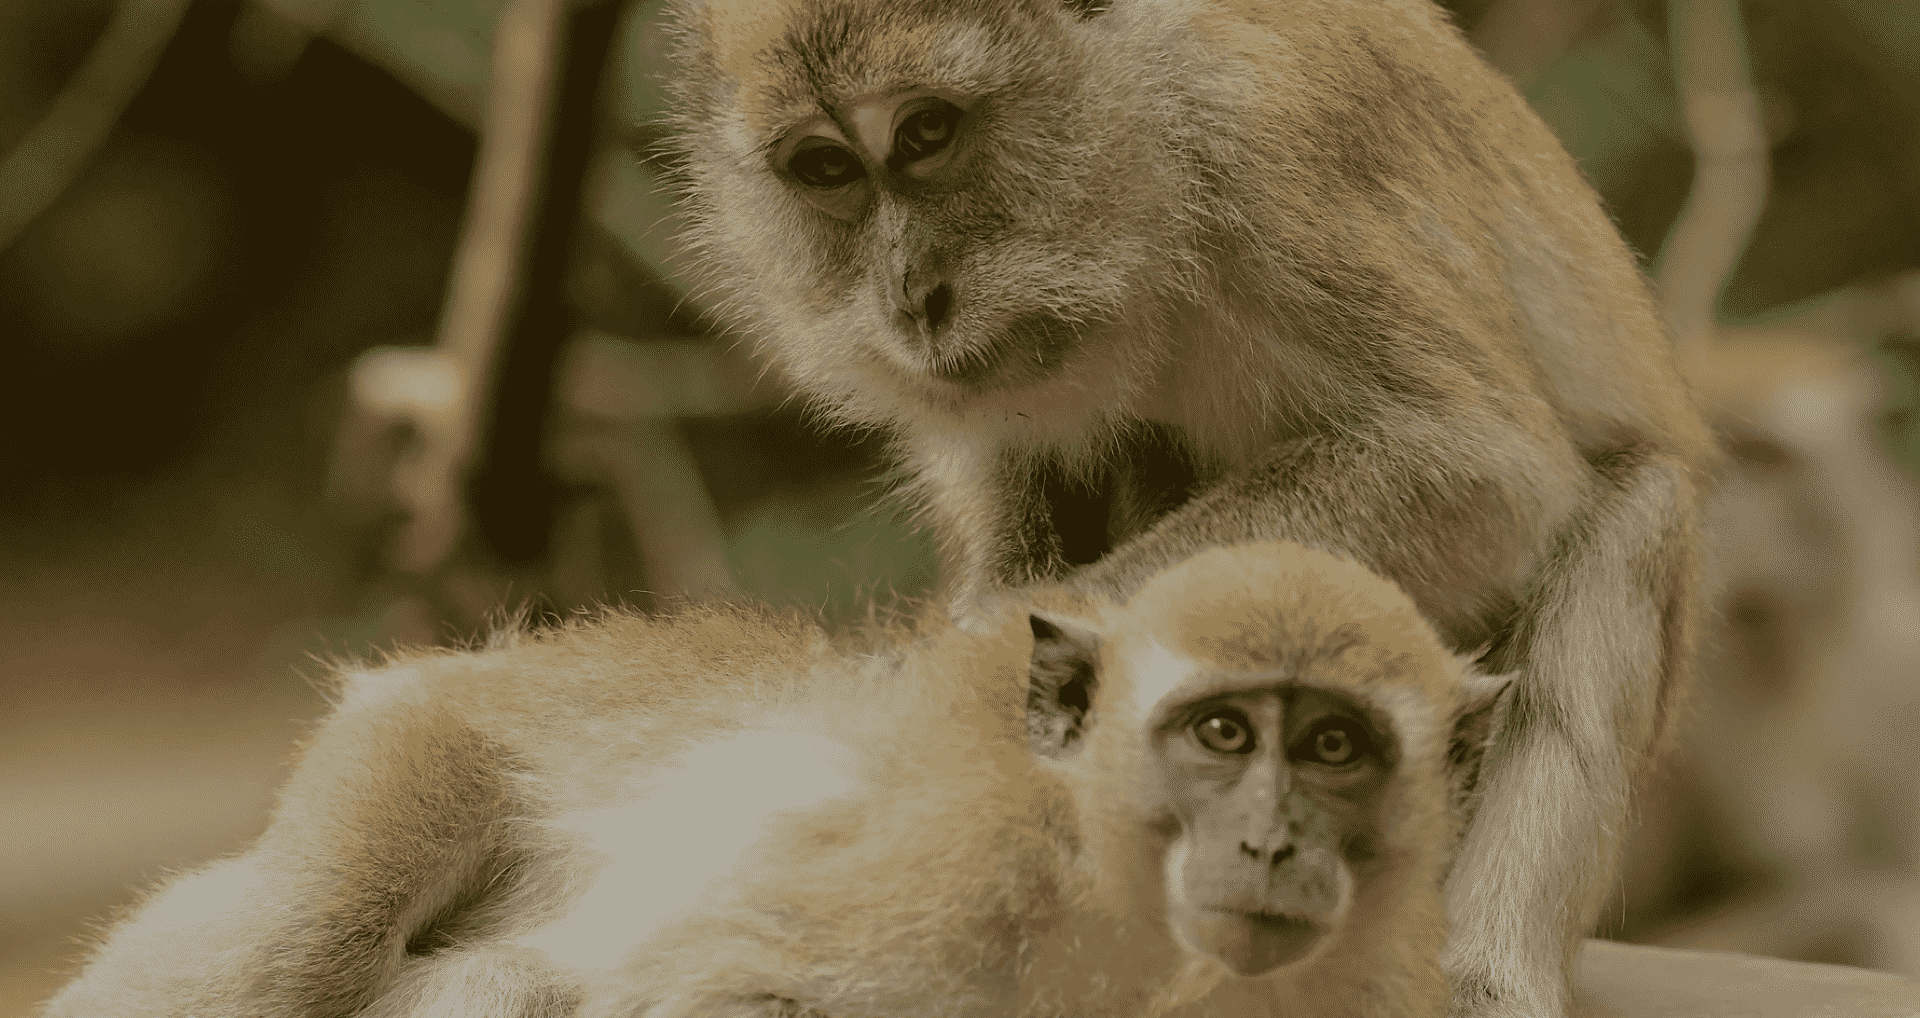 Mapping the Brains of Expensive Macaques